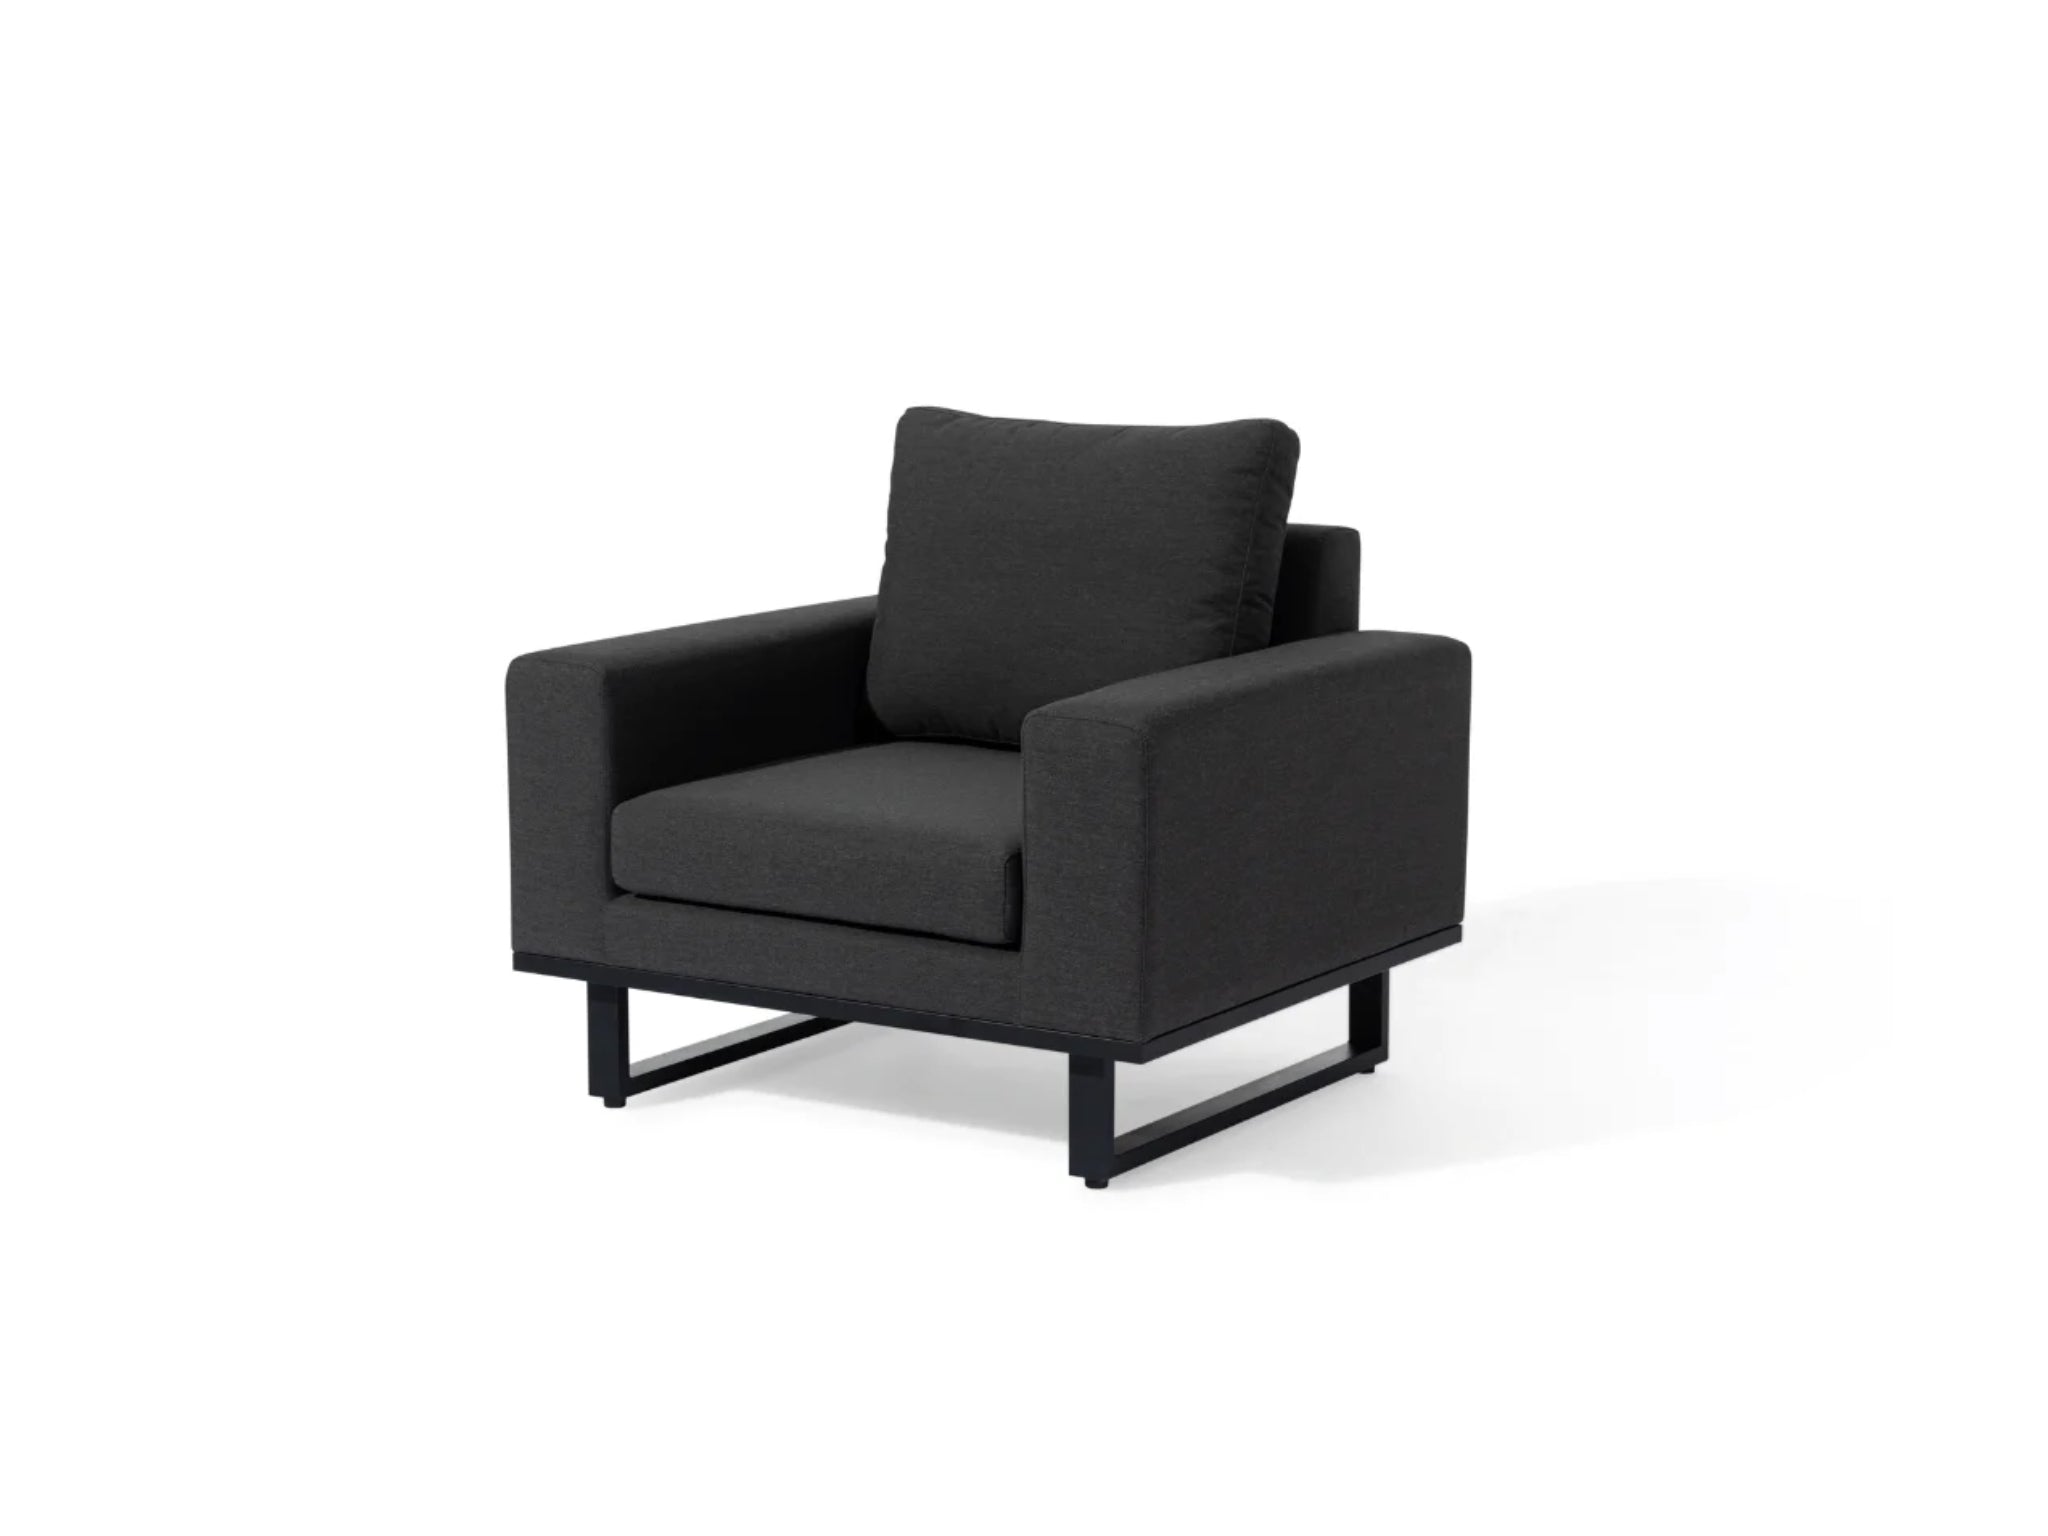 SIMPO by Sunlongarden Ethos Lounge Chair